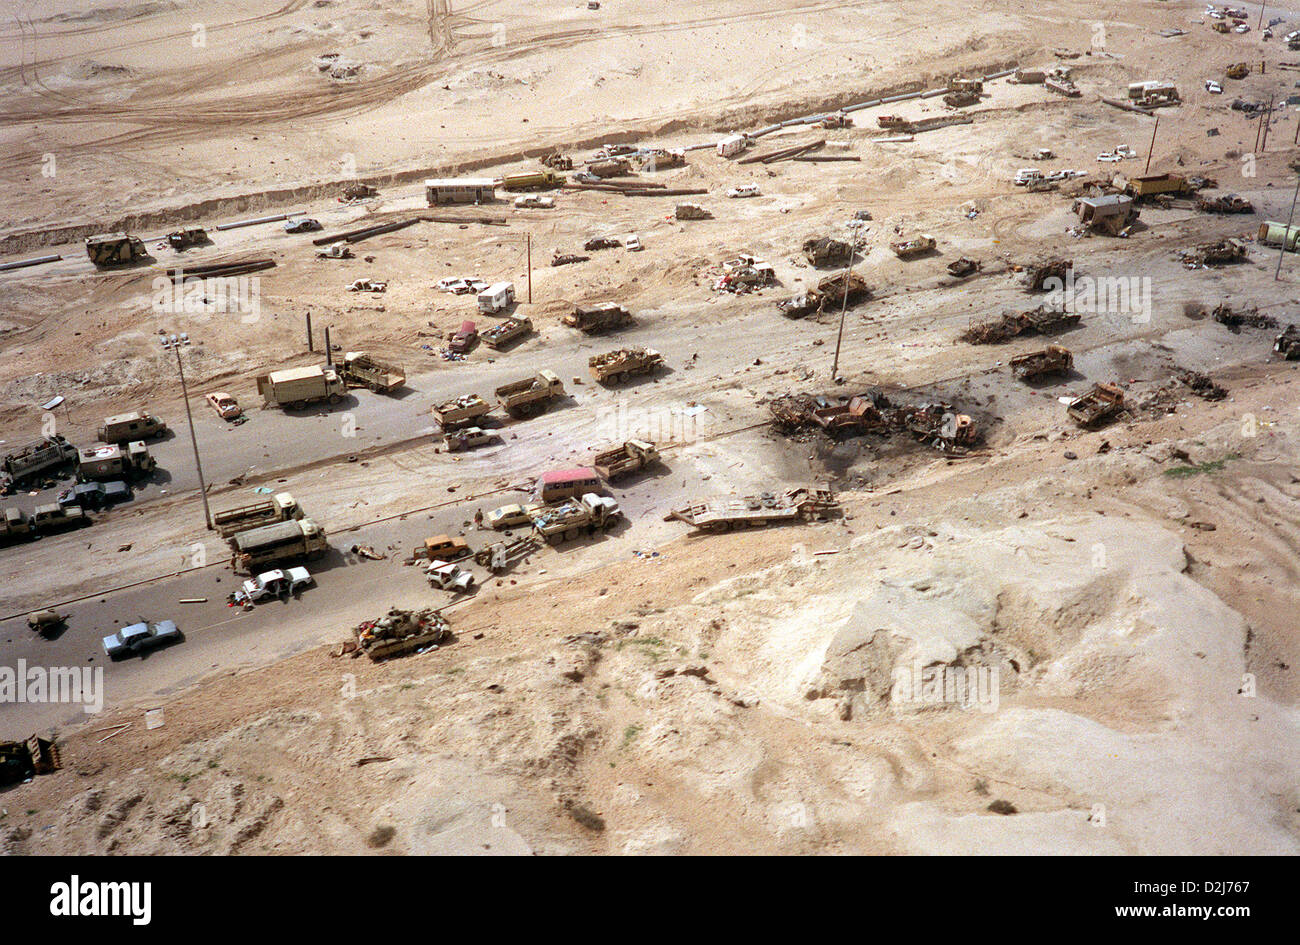 Destroyed Iraqi armored vehicles litter Highway 80, known as the Highway of Death destroyed by coalition aircraft during the Gulf War February 28, 1991 in Kuwait. Stock Photo